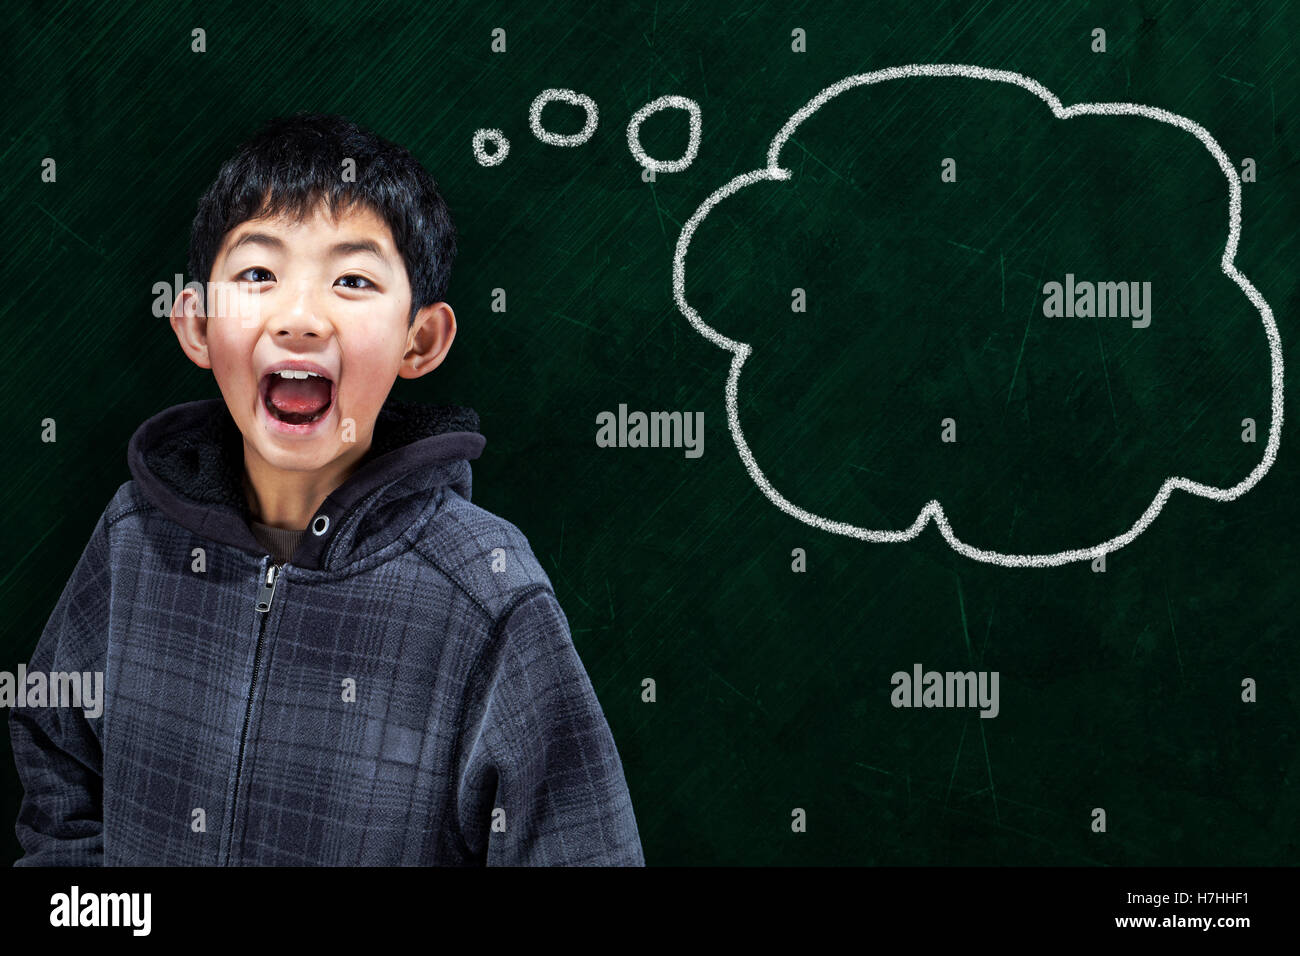 Smart Asian boy mouth wide opened in classroom setting with chalkboard background and thought bubble copy space. Stock Photo